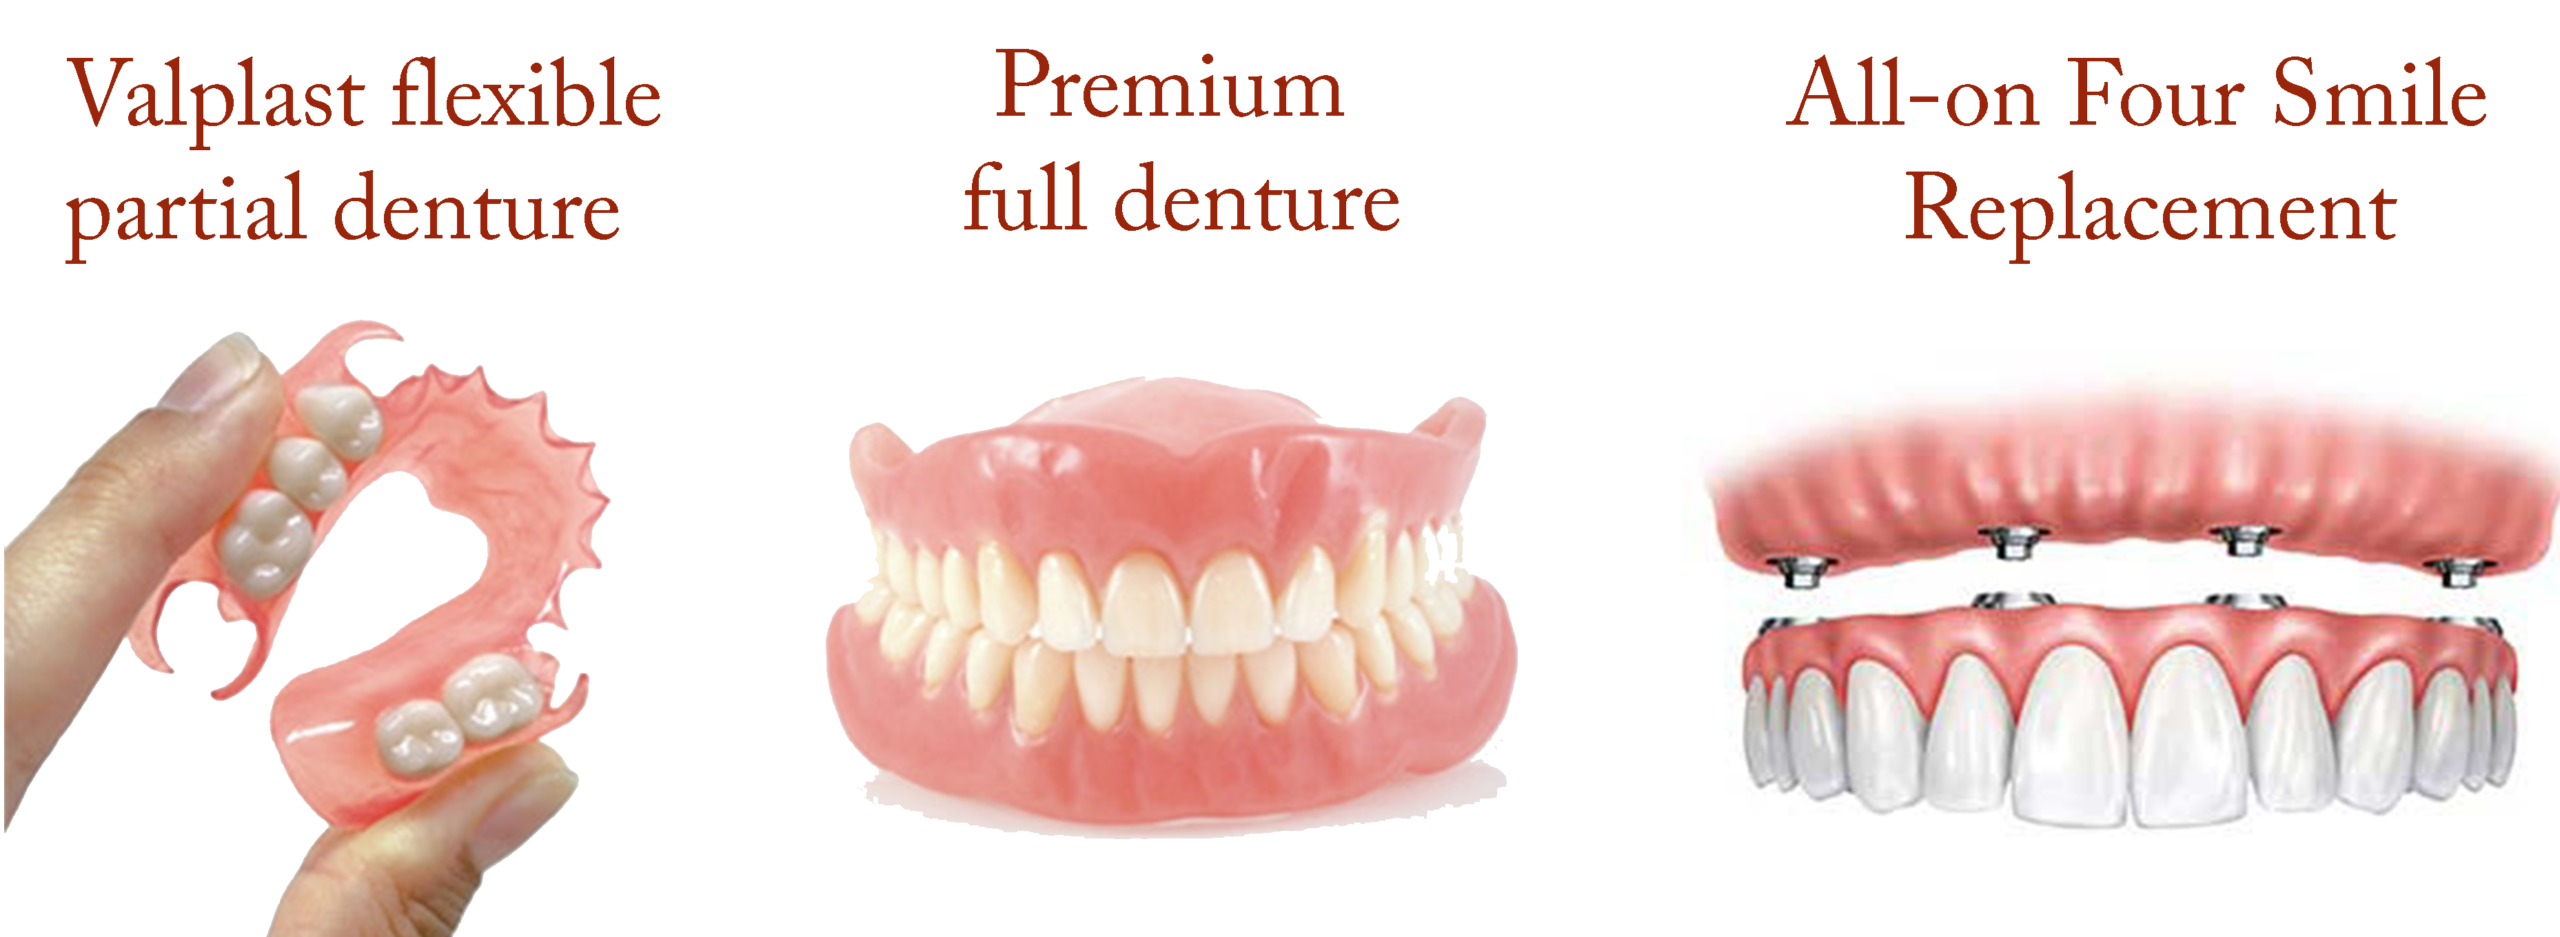 Dentures, Partials, All-On Four